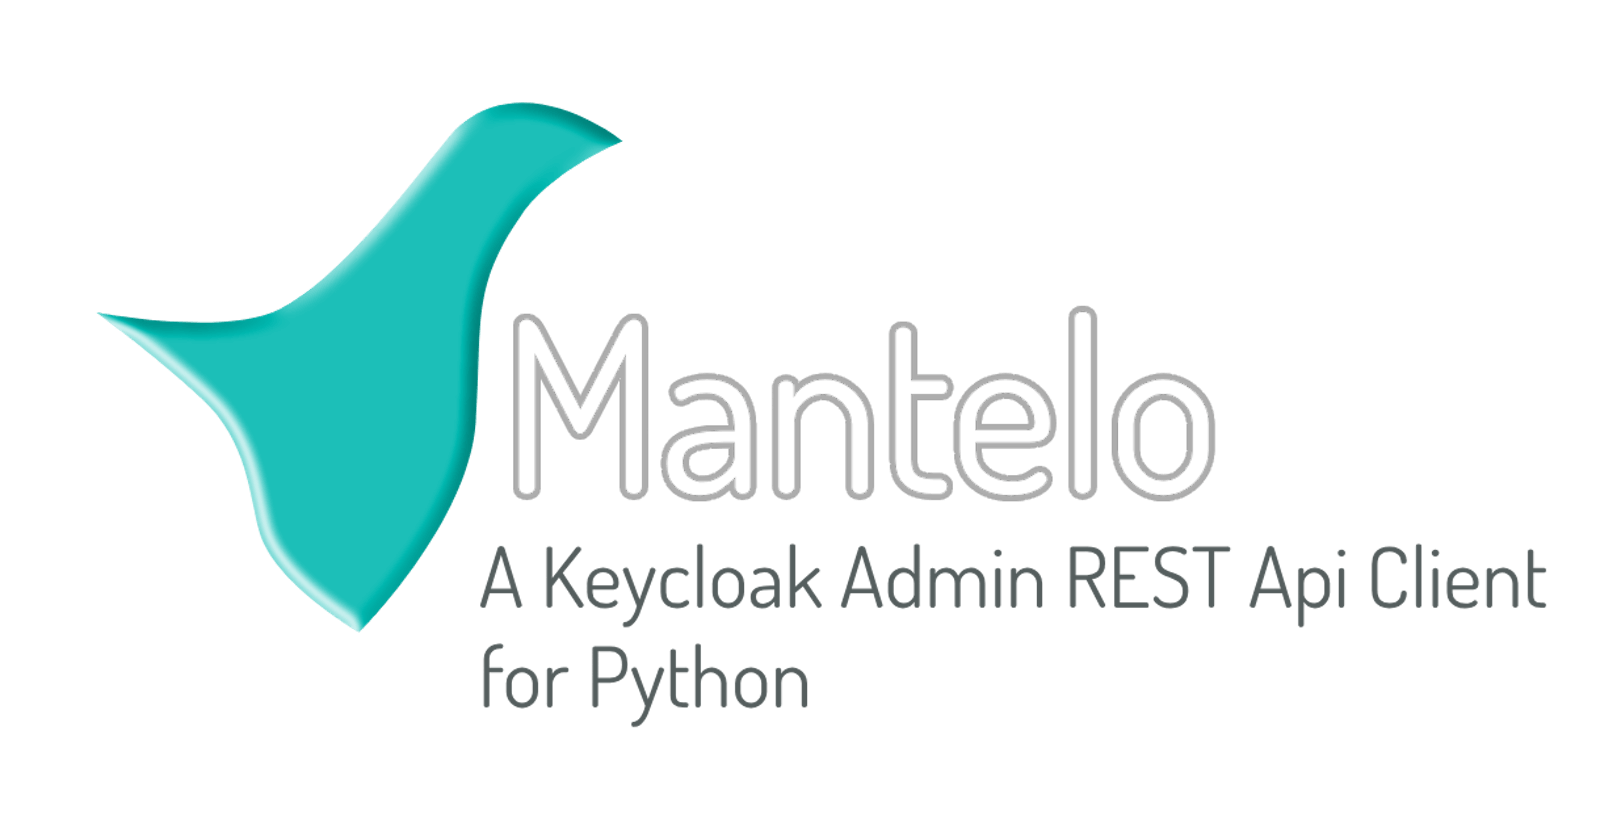 Introducing Mantelo - The Best Keycloak Admin Client for Python